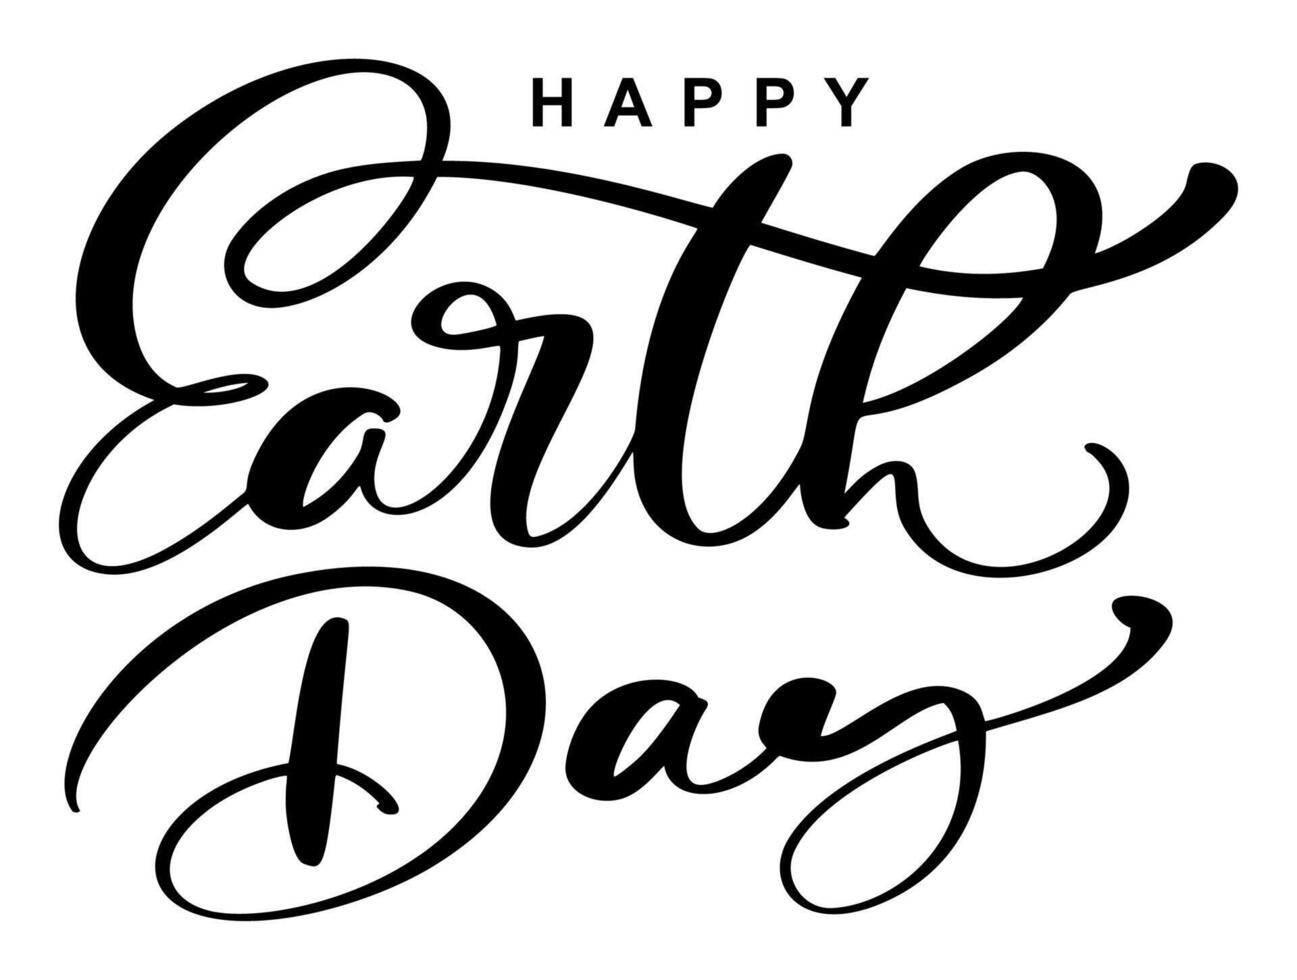 Handwritten lettering text Happy Earth Day logo. Typography calligraphic design for greeting cards and poster template celebration. illustration vector